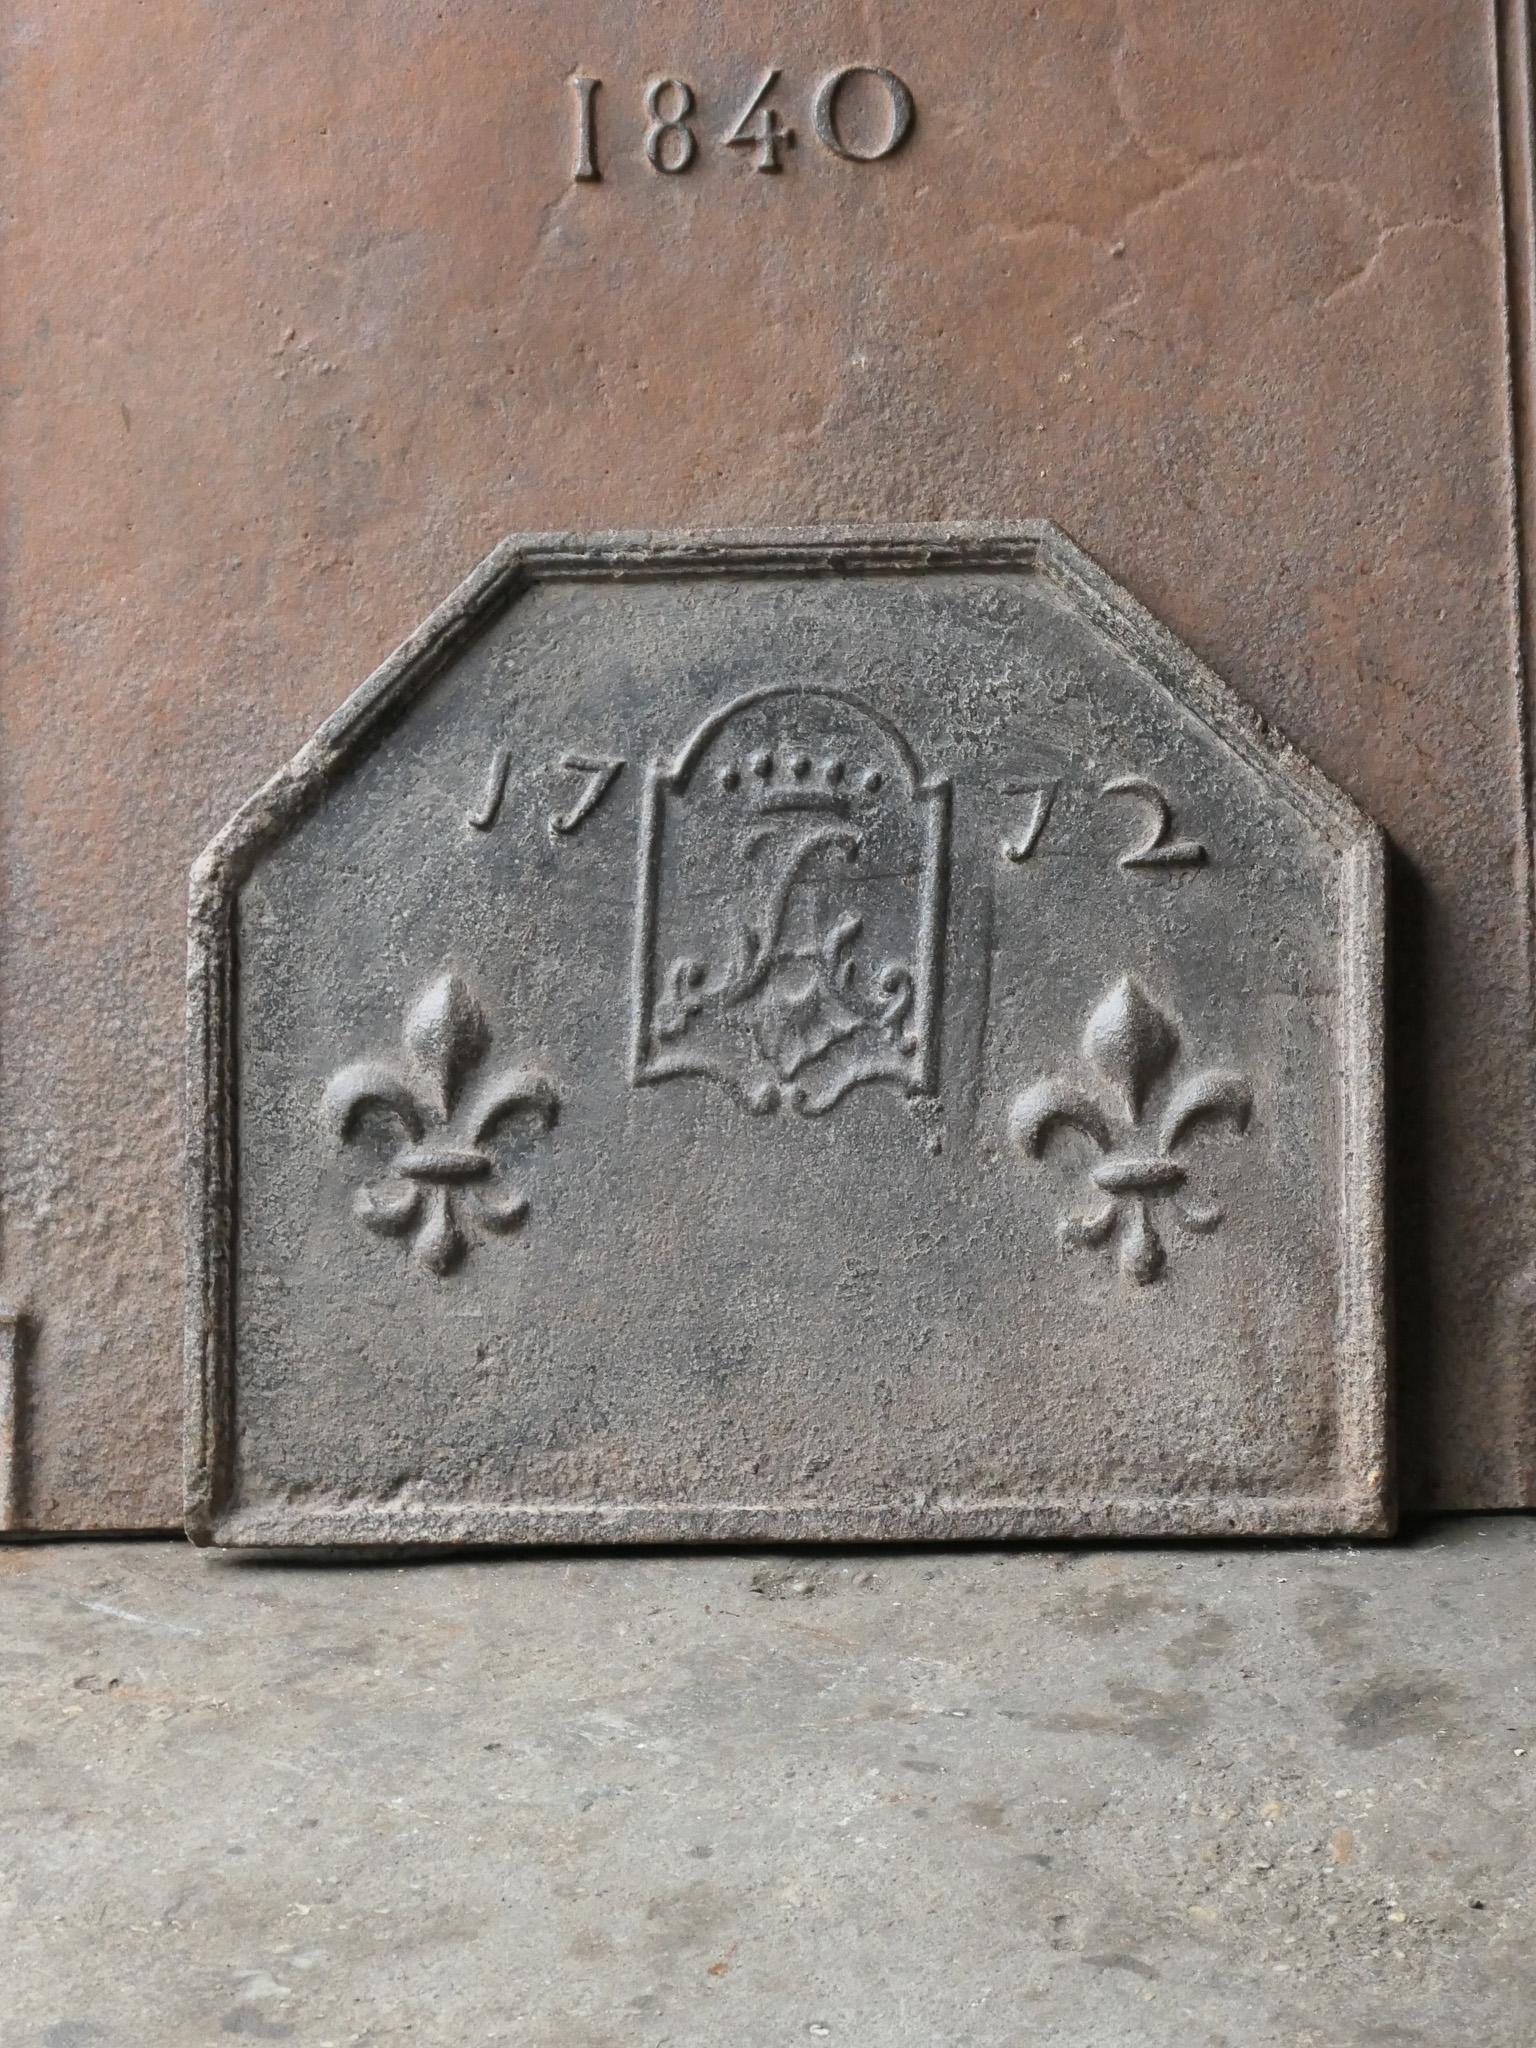 French Louis XV fireback with a coat of arms. On the sides are two fleurs-de-lys portrayed, also known as French Lilies, symbolizing the purity of nobility. The year of production, 1772, is also cast in the fireback.

The fireback is made of cast